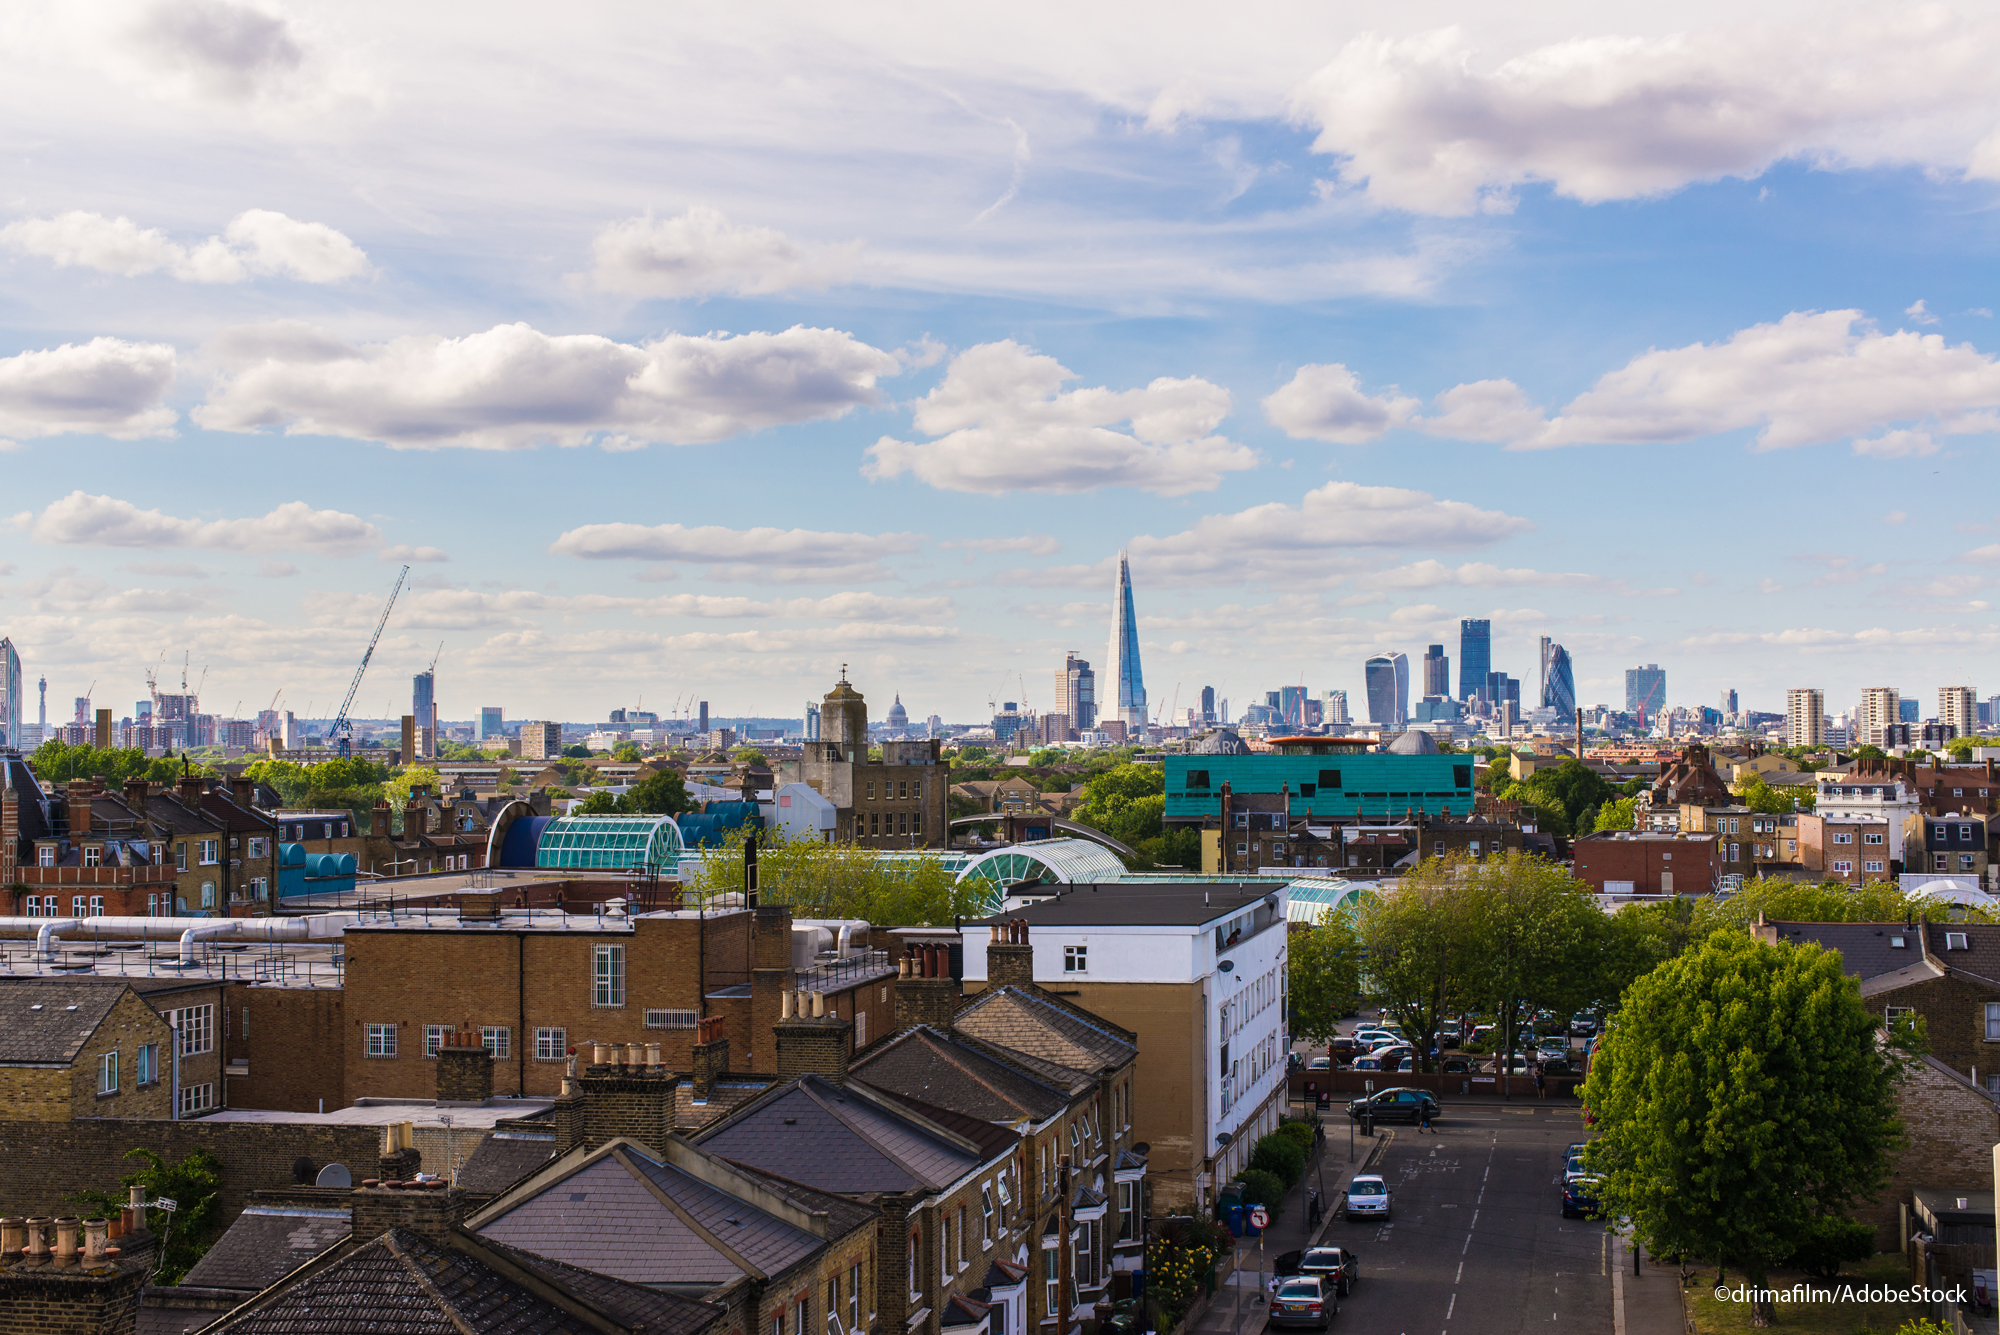 Poll reveals majority of Londoners support new housebuilding but not convinced on greenbelt